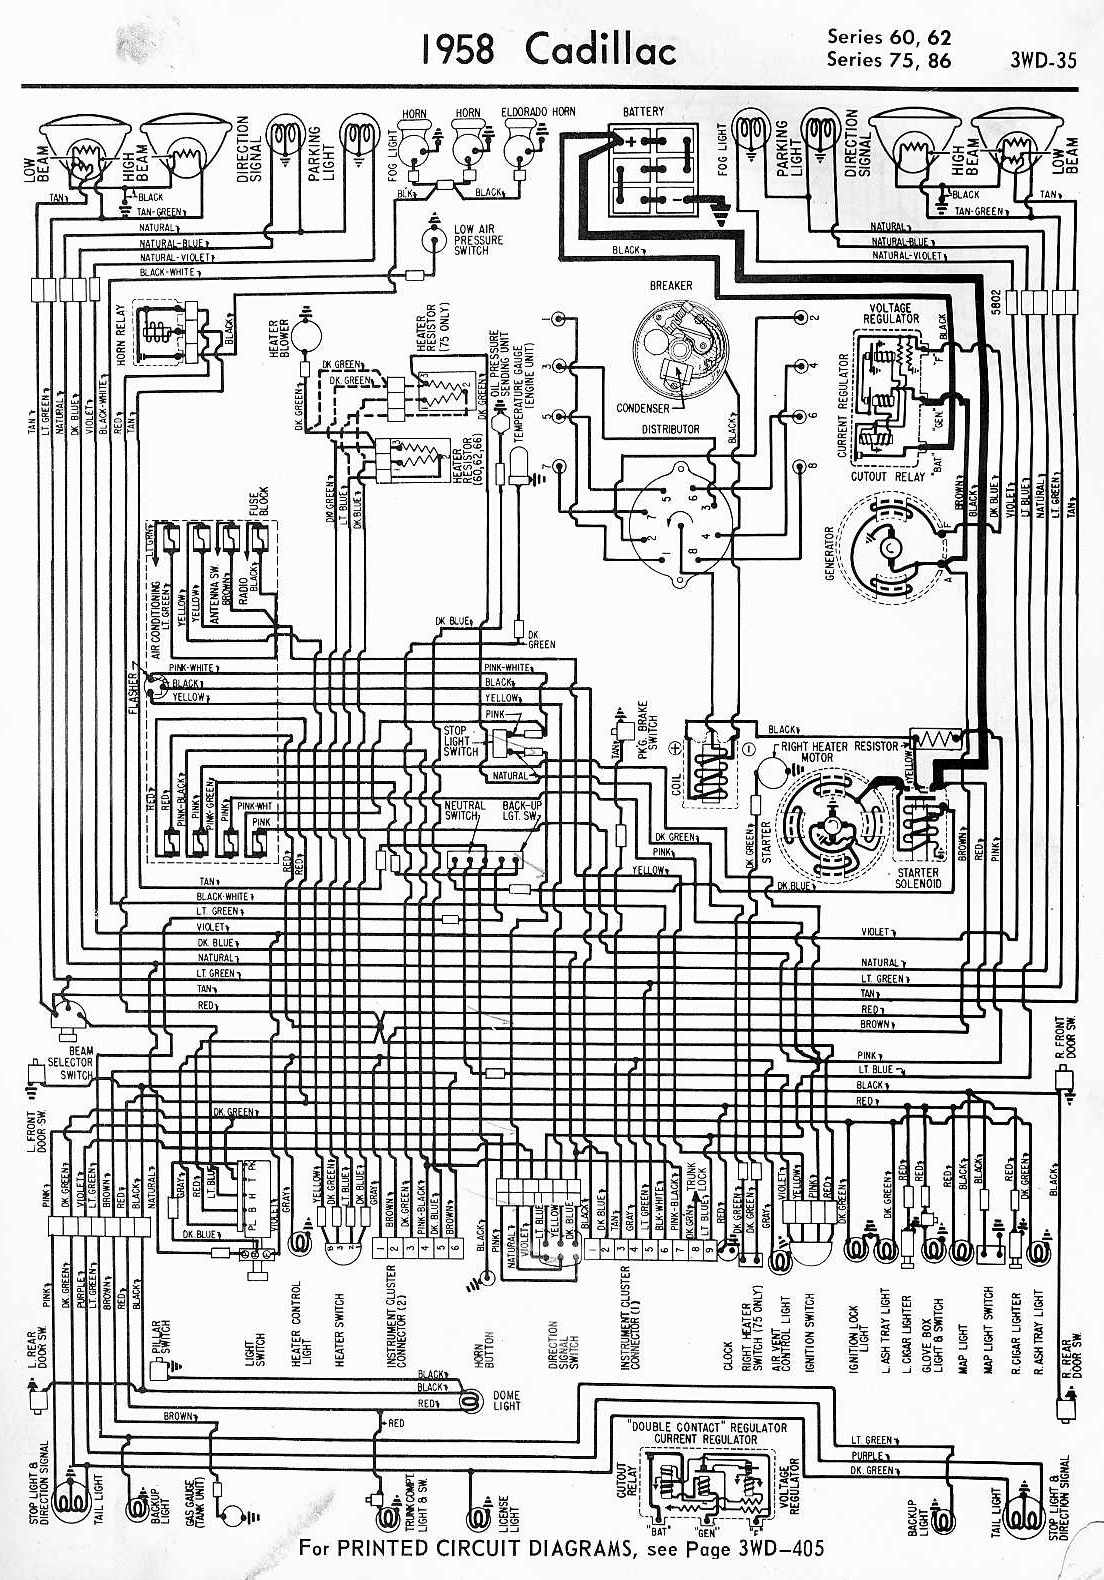 2005 Cadillac Sts Wiring Schematic Collection - Wiring Diagram Sample